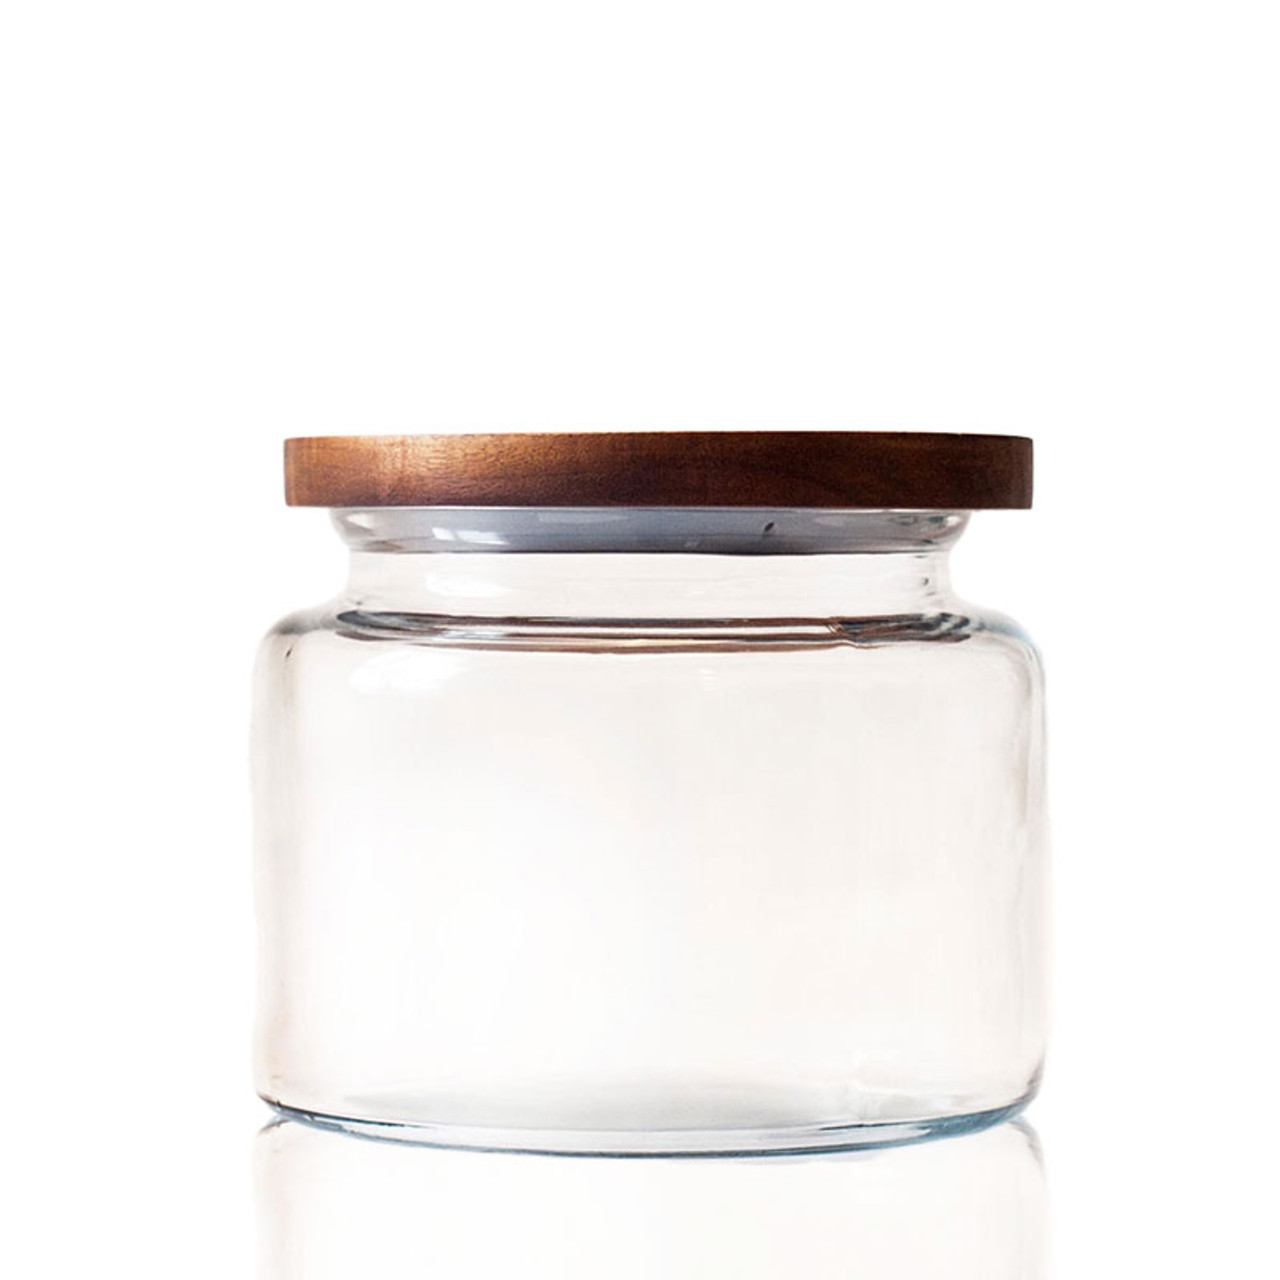 64 Oz Glass Jar with Plastic Airtight Lid (4 Pack) - Includes 6